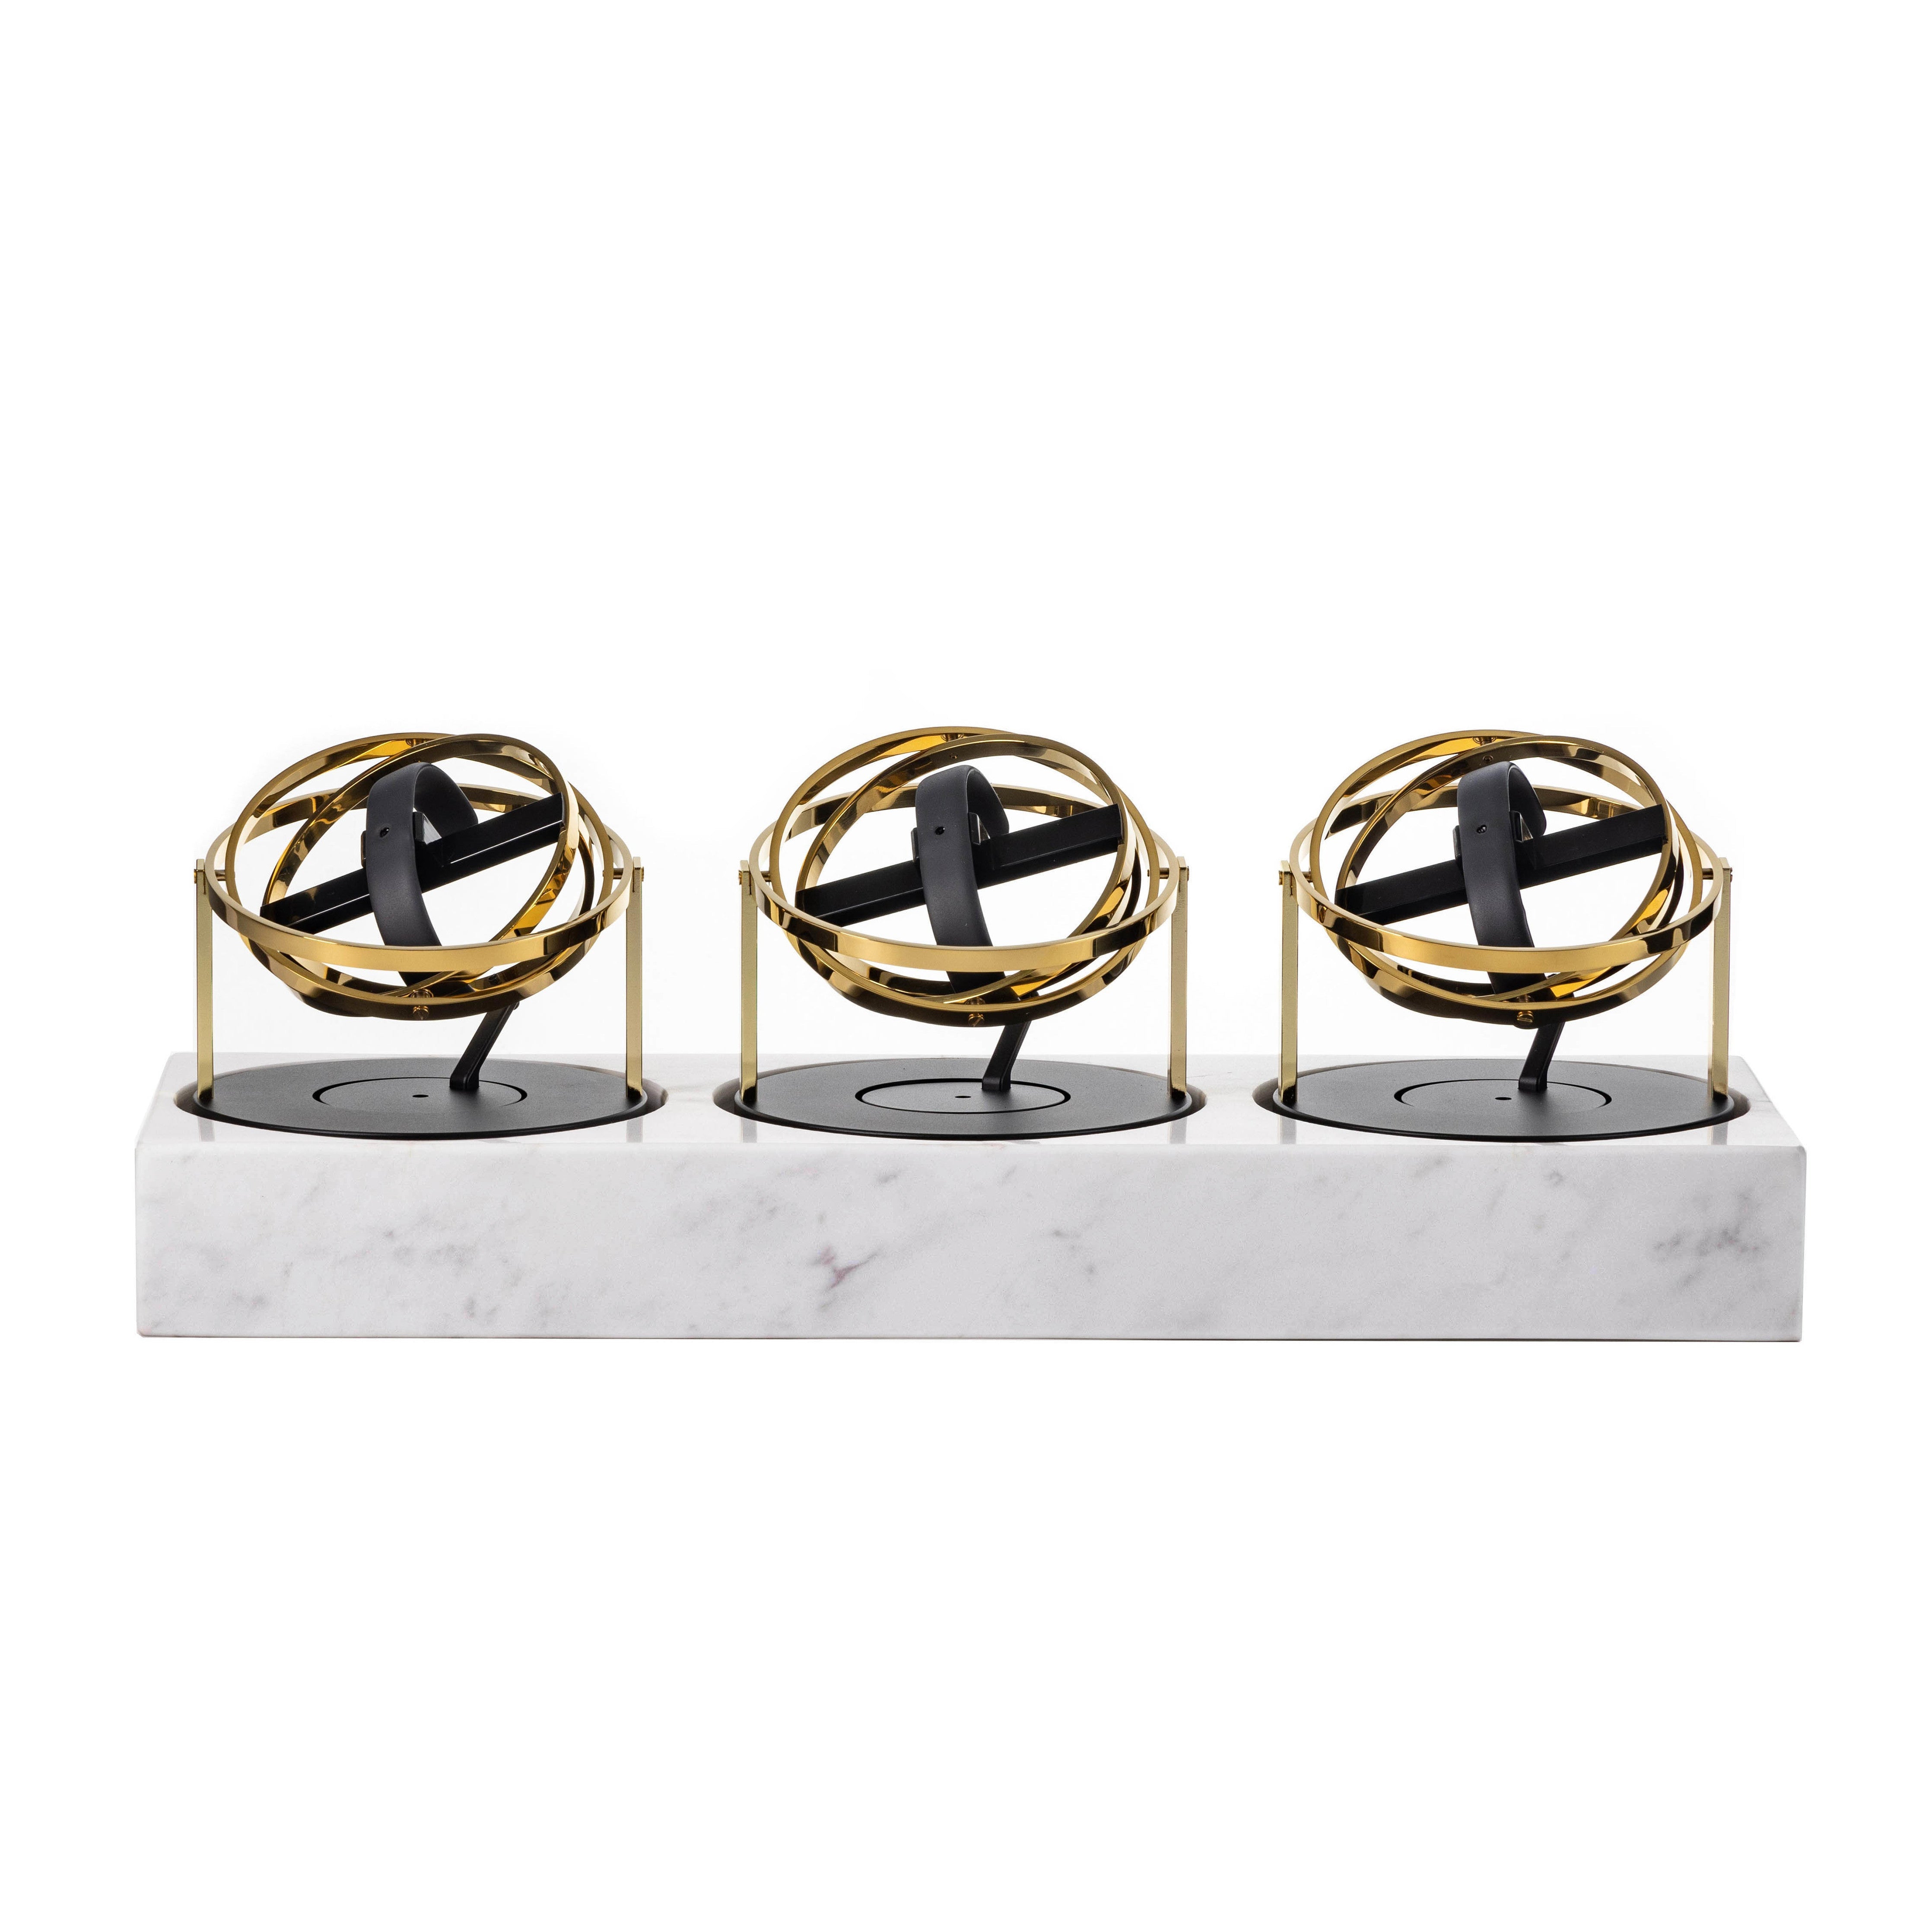 Triple Watch Winder - Astronomia X1 Silver - White Marble Edition